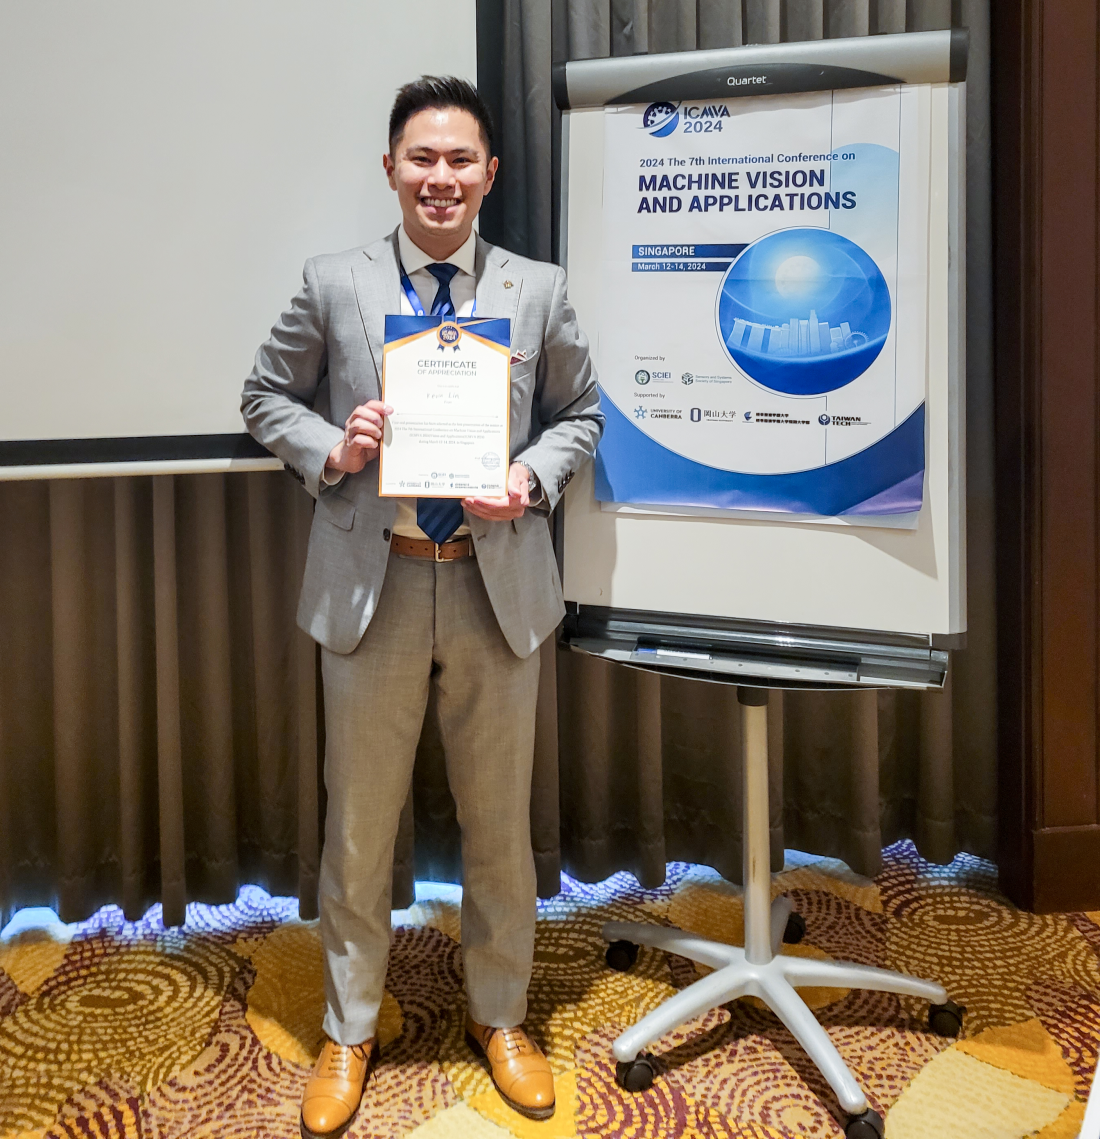 Kevin Lin received international recognition with the Best Presentation Award in the "Image Based Data Analysis and Application System" session at the 7th International Conference on Machine Vision and Applications (ICMVA 2024) held in Singapore